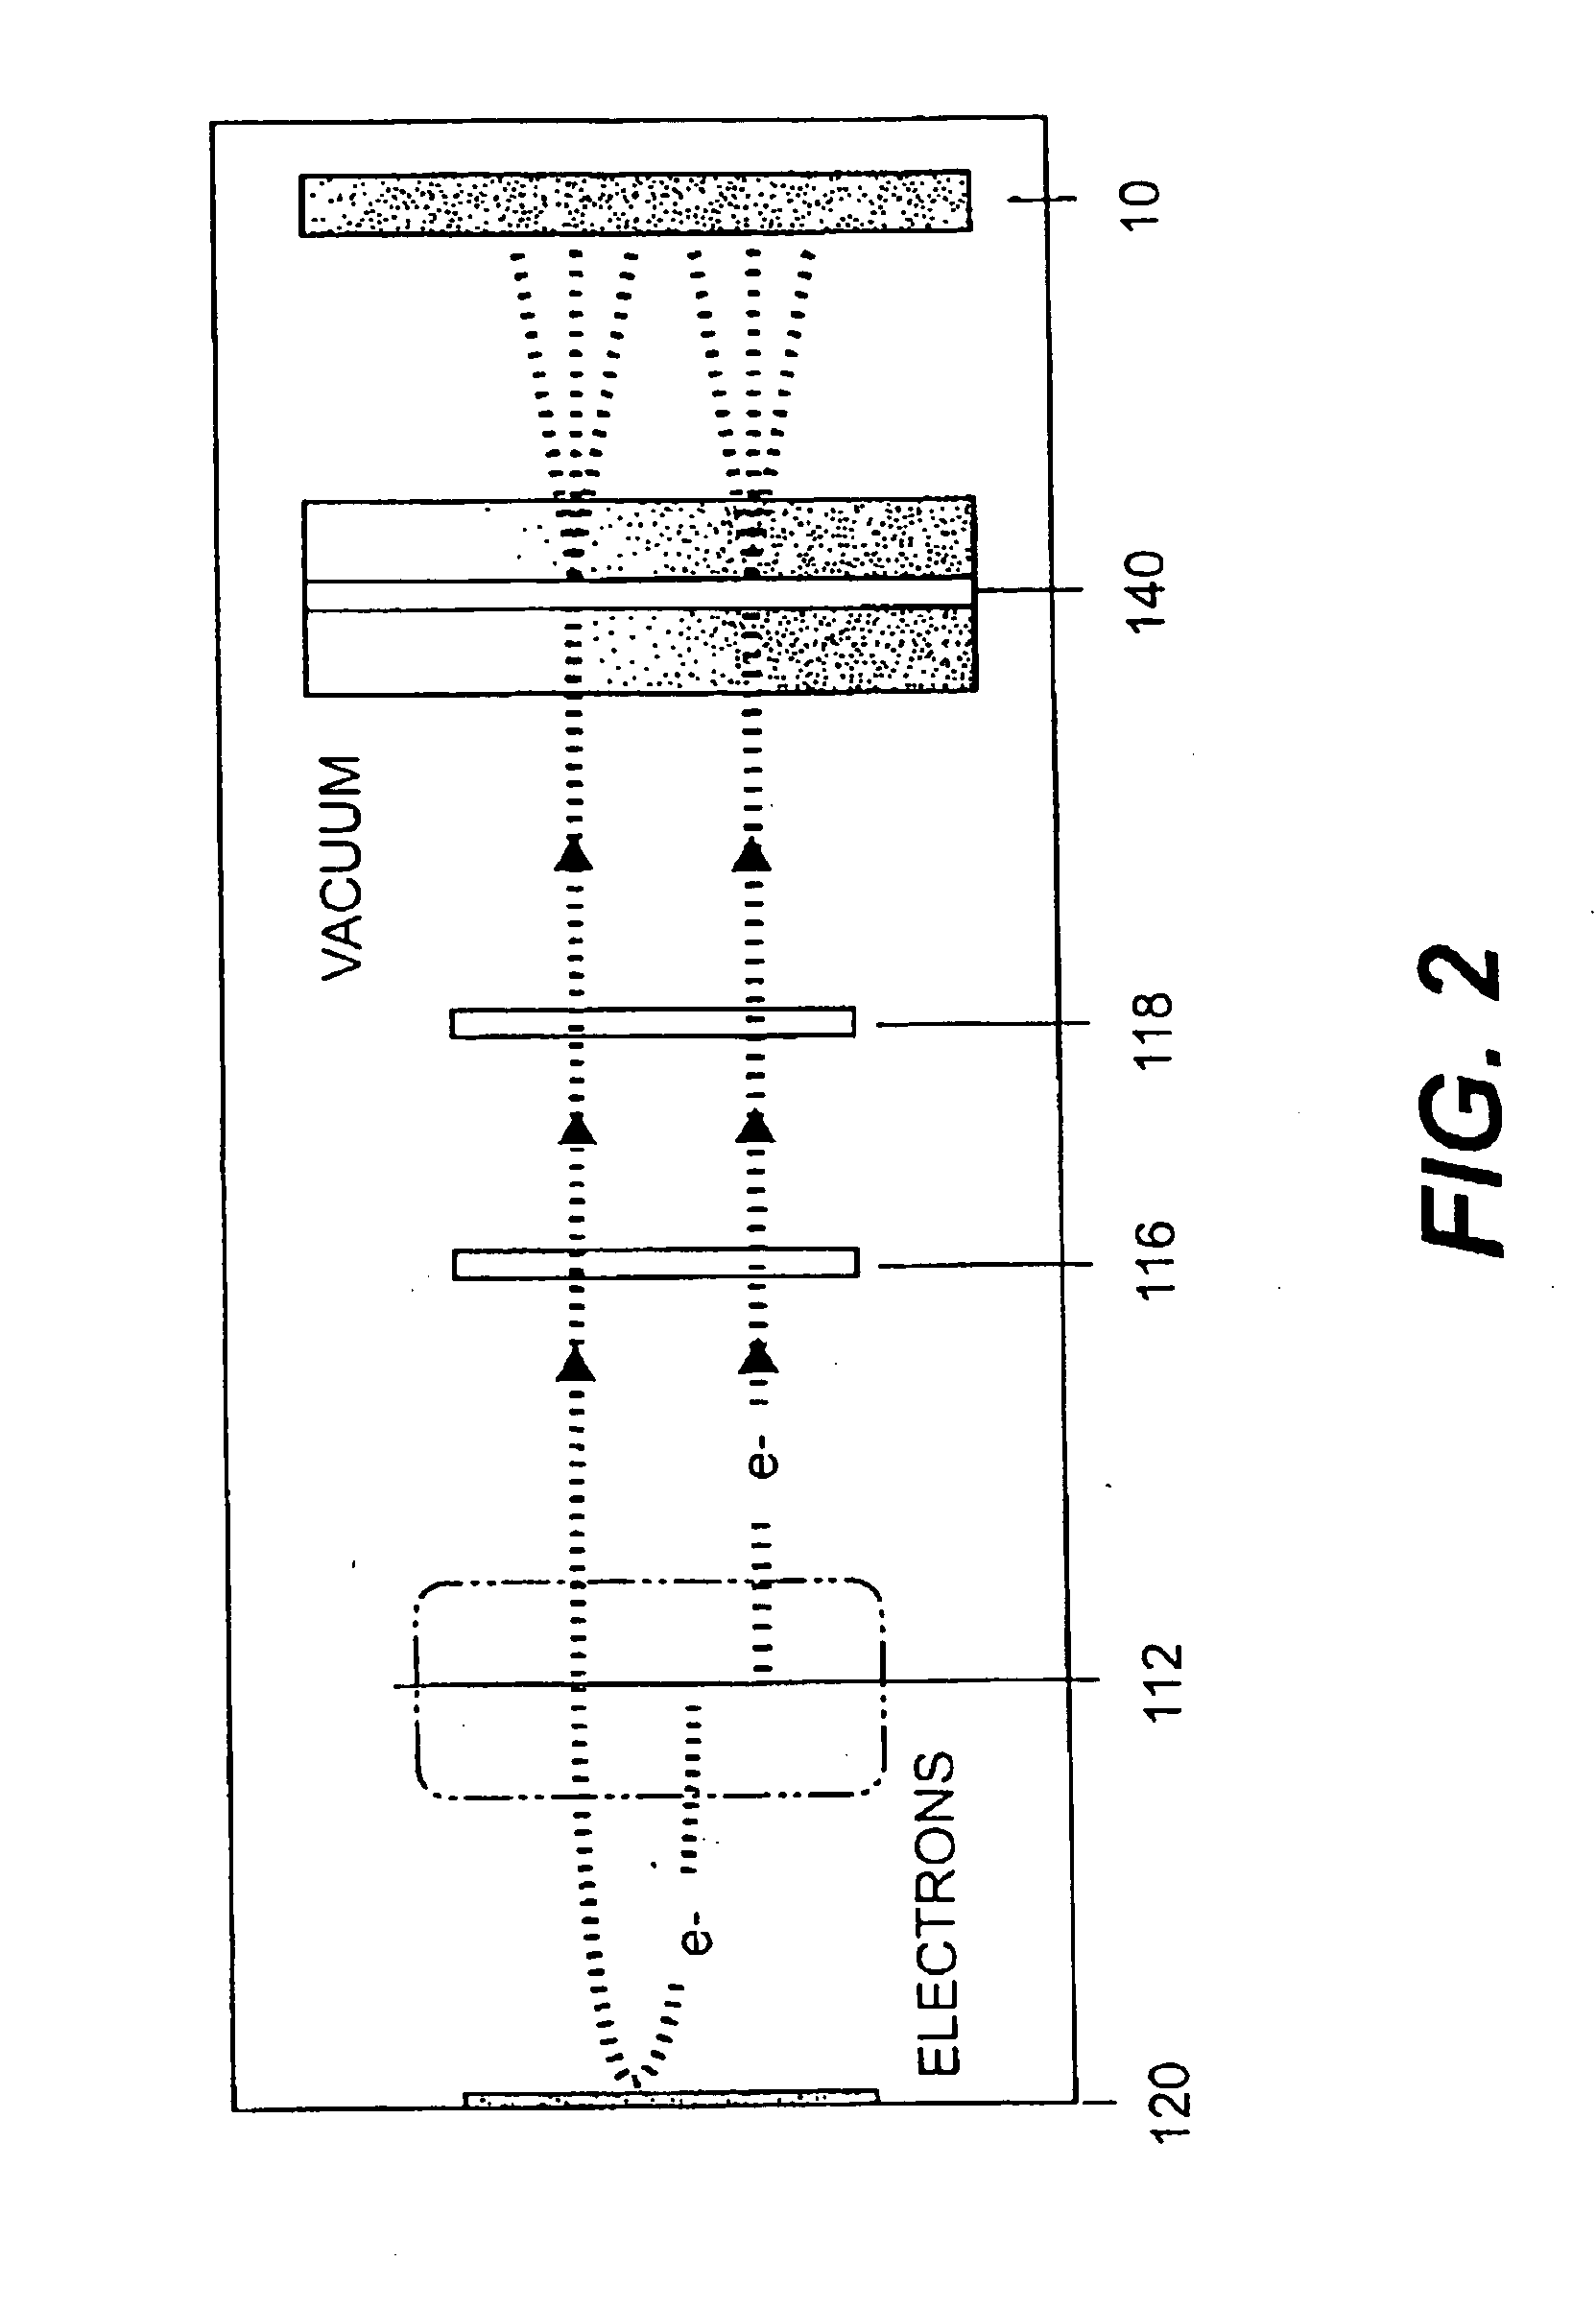 Materials treatable by particle beam processing apparatus